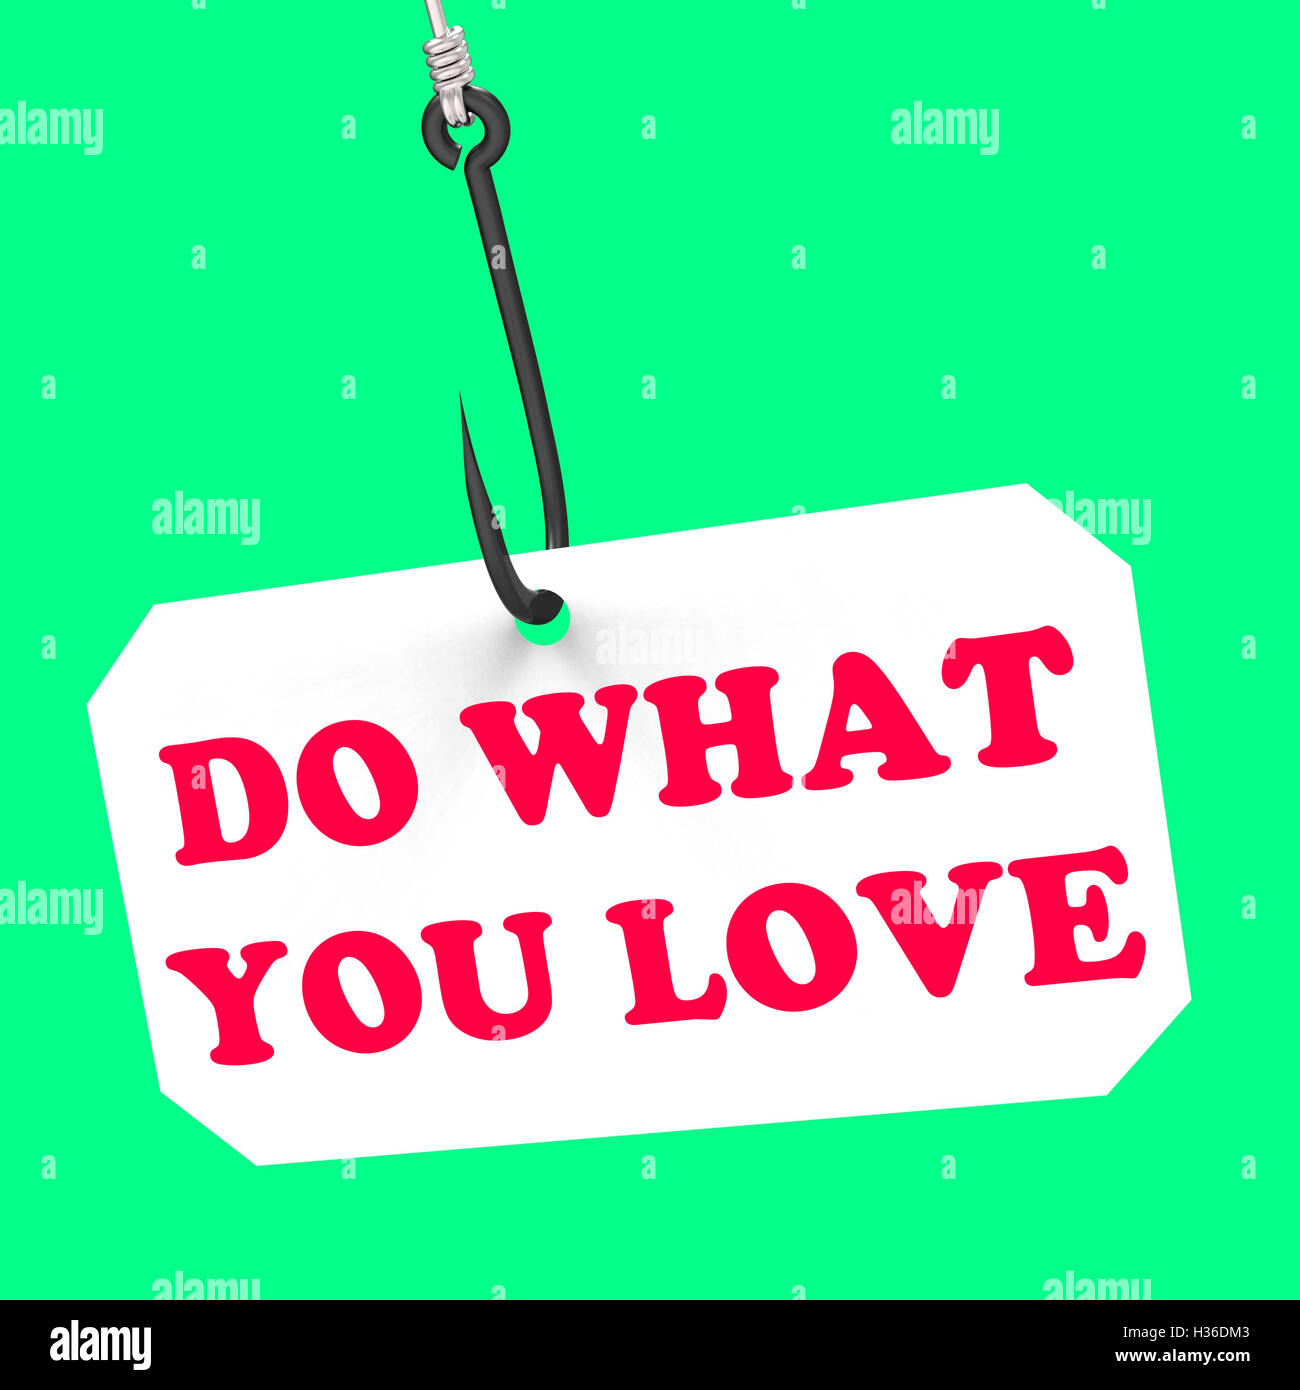 Do What You Love On Hook Shows Inspiration And Motivation Stock Photo